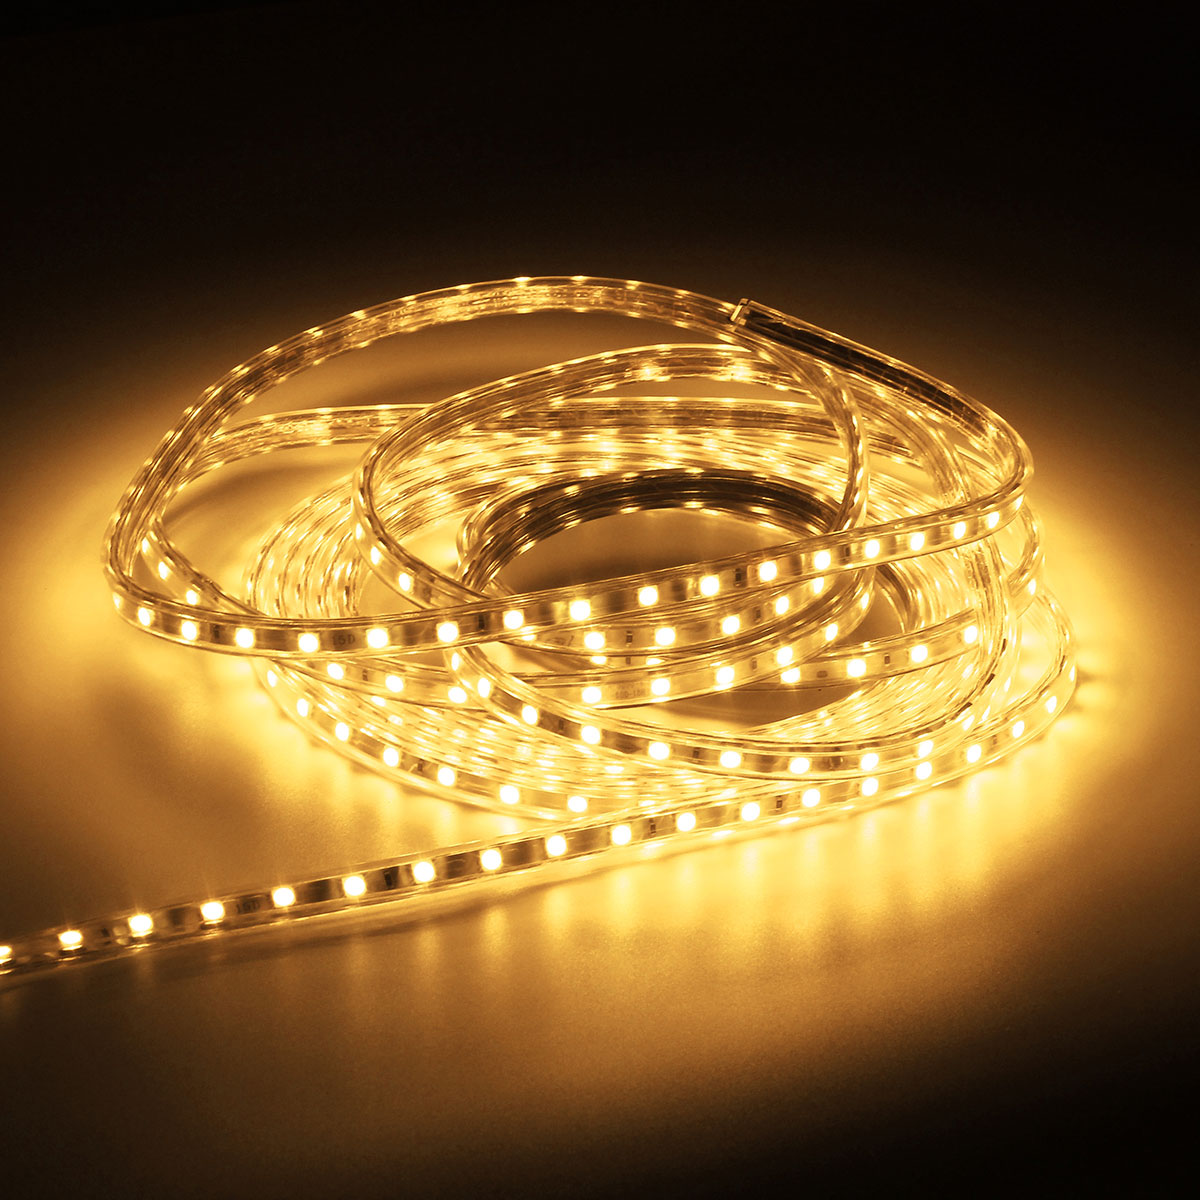 220V-7M-5050-LED-SMD-Outdoor-Waterproof-Flexible-Tape-Rope-Strip-Light-Xmas-1066363-8